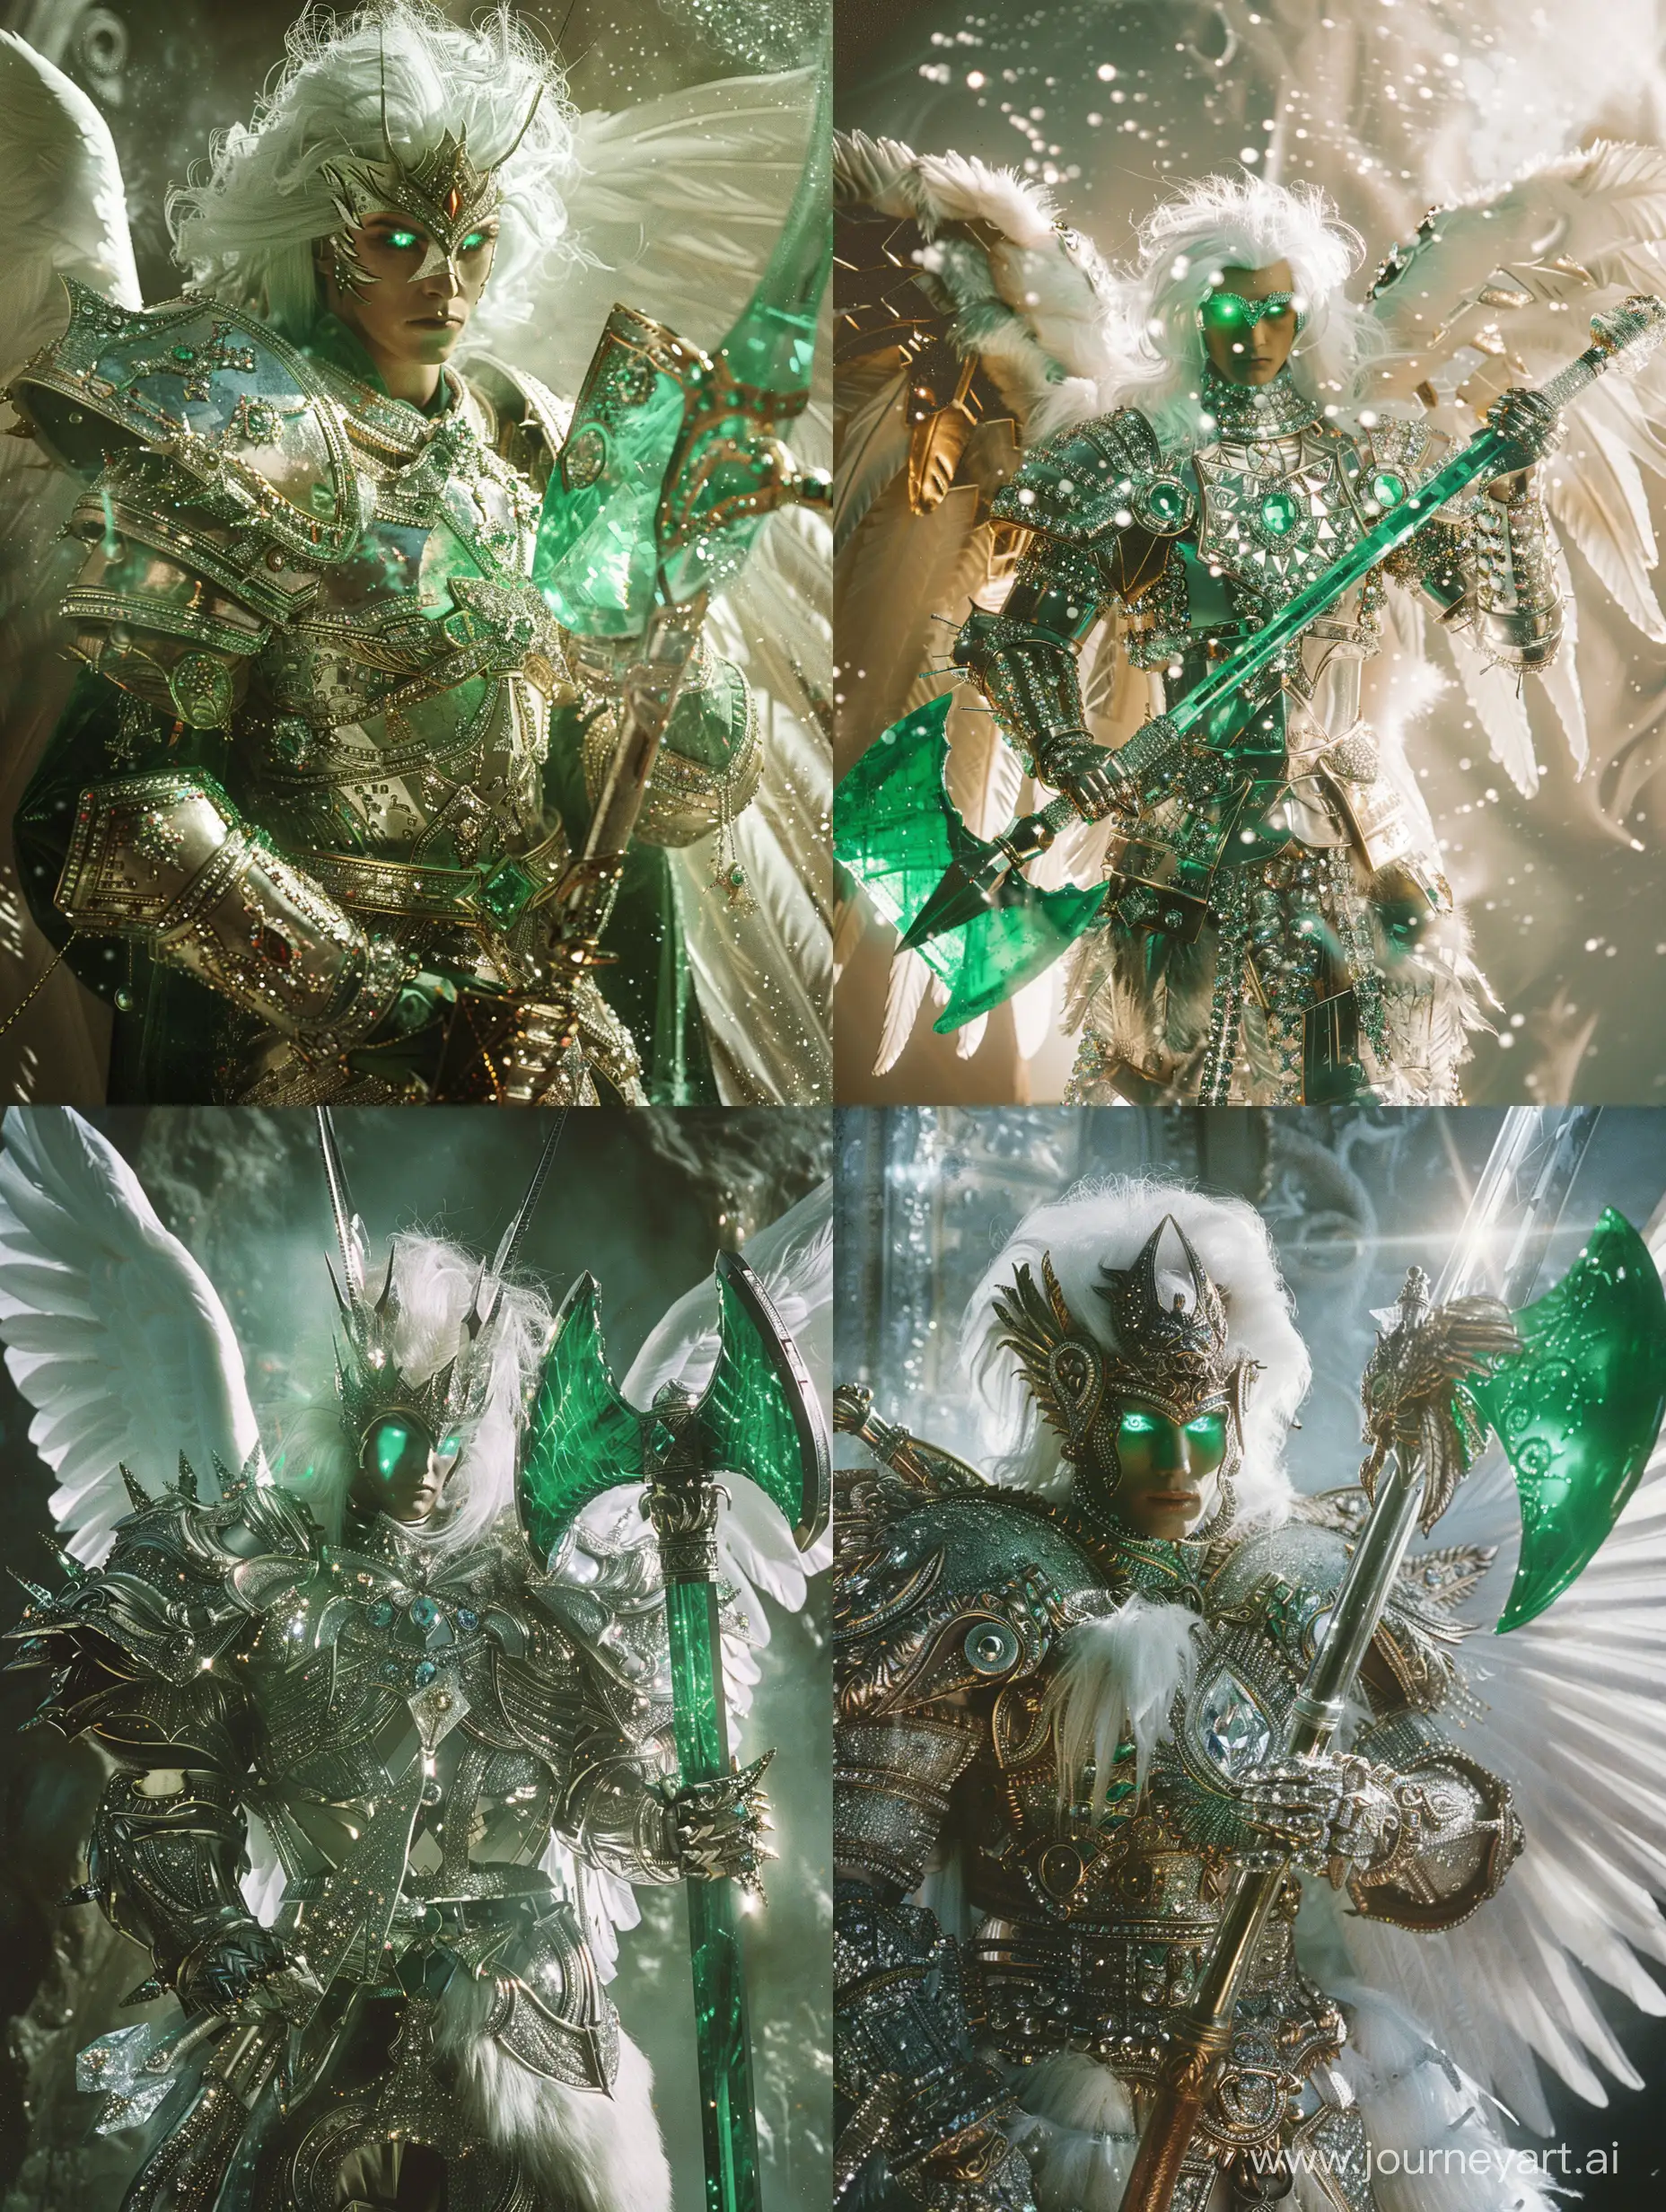 Fantasy-Medieval-Knight-KingGod-with-Emerald-Eyes-and-Diamond-Armor-Holding-Crystal-Sword